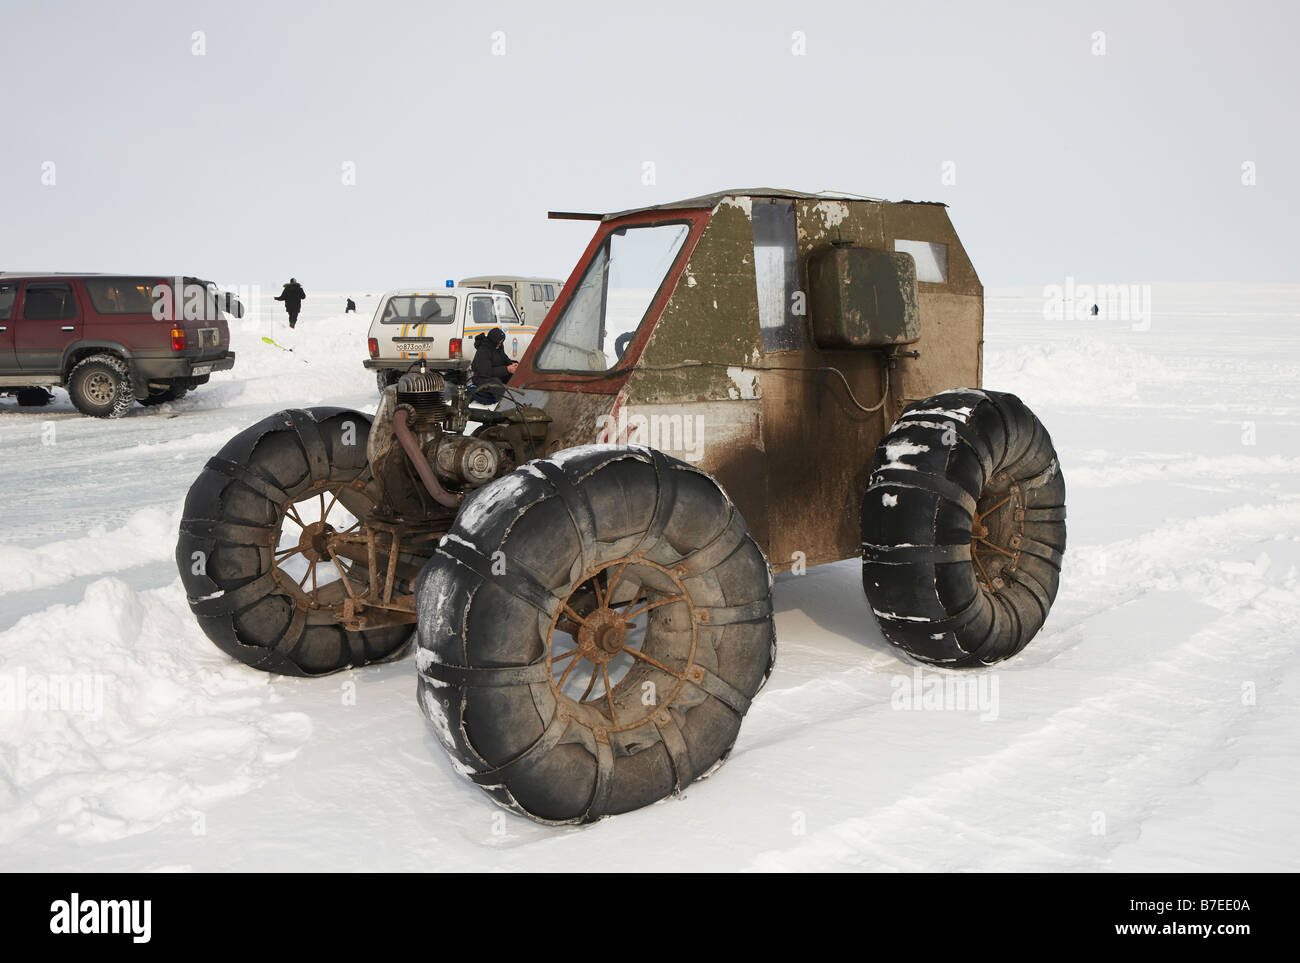 Ice fishing for smelts by homemade 4 wheeler vehicle, Anadyr Chukotka,  Siberia Russia Stock Photo - Alamy